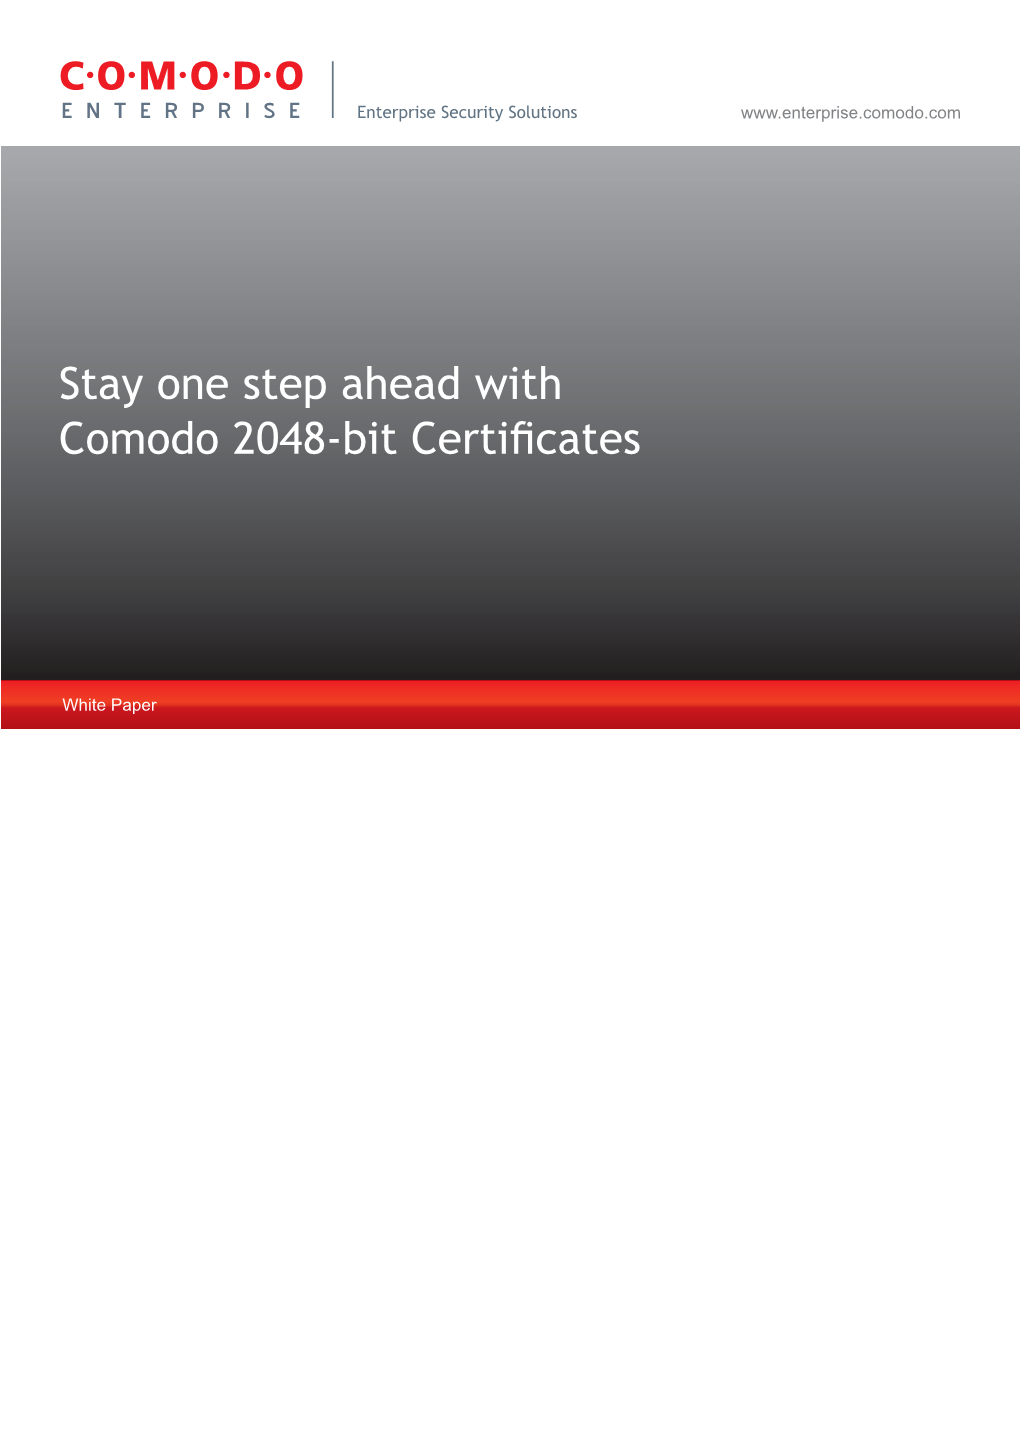 Stay One Step Ahead with Comodo 2048-Bit Certificates